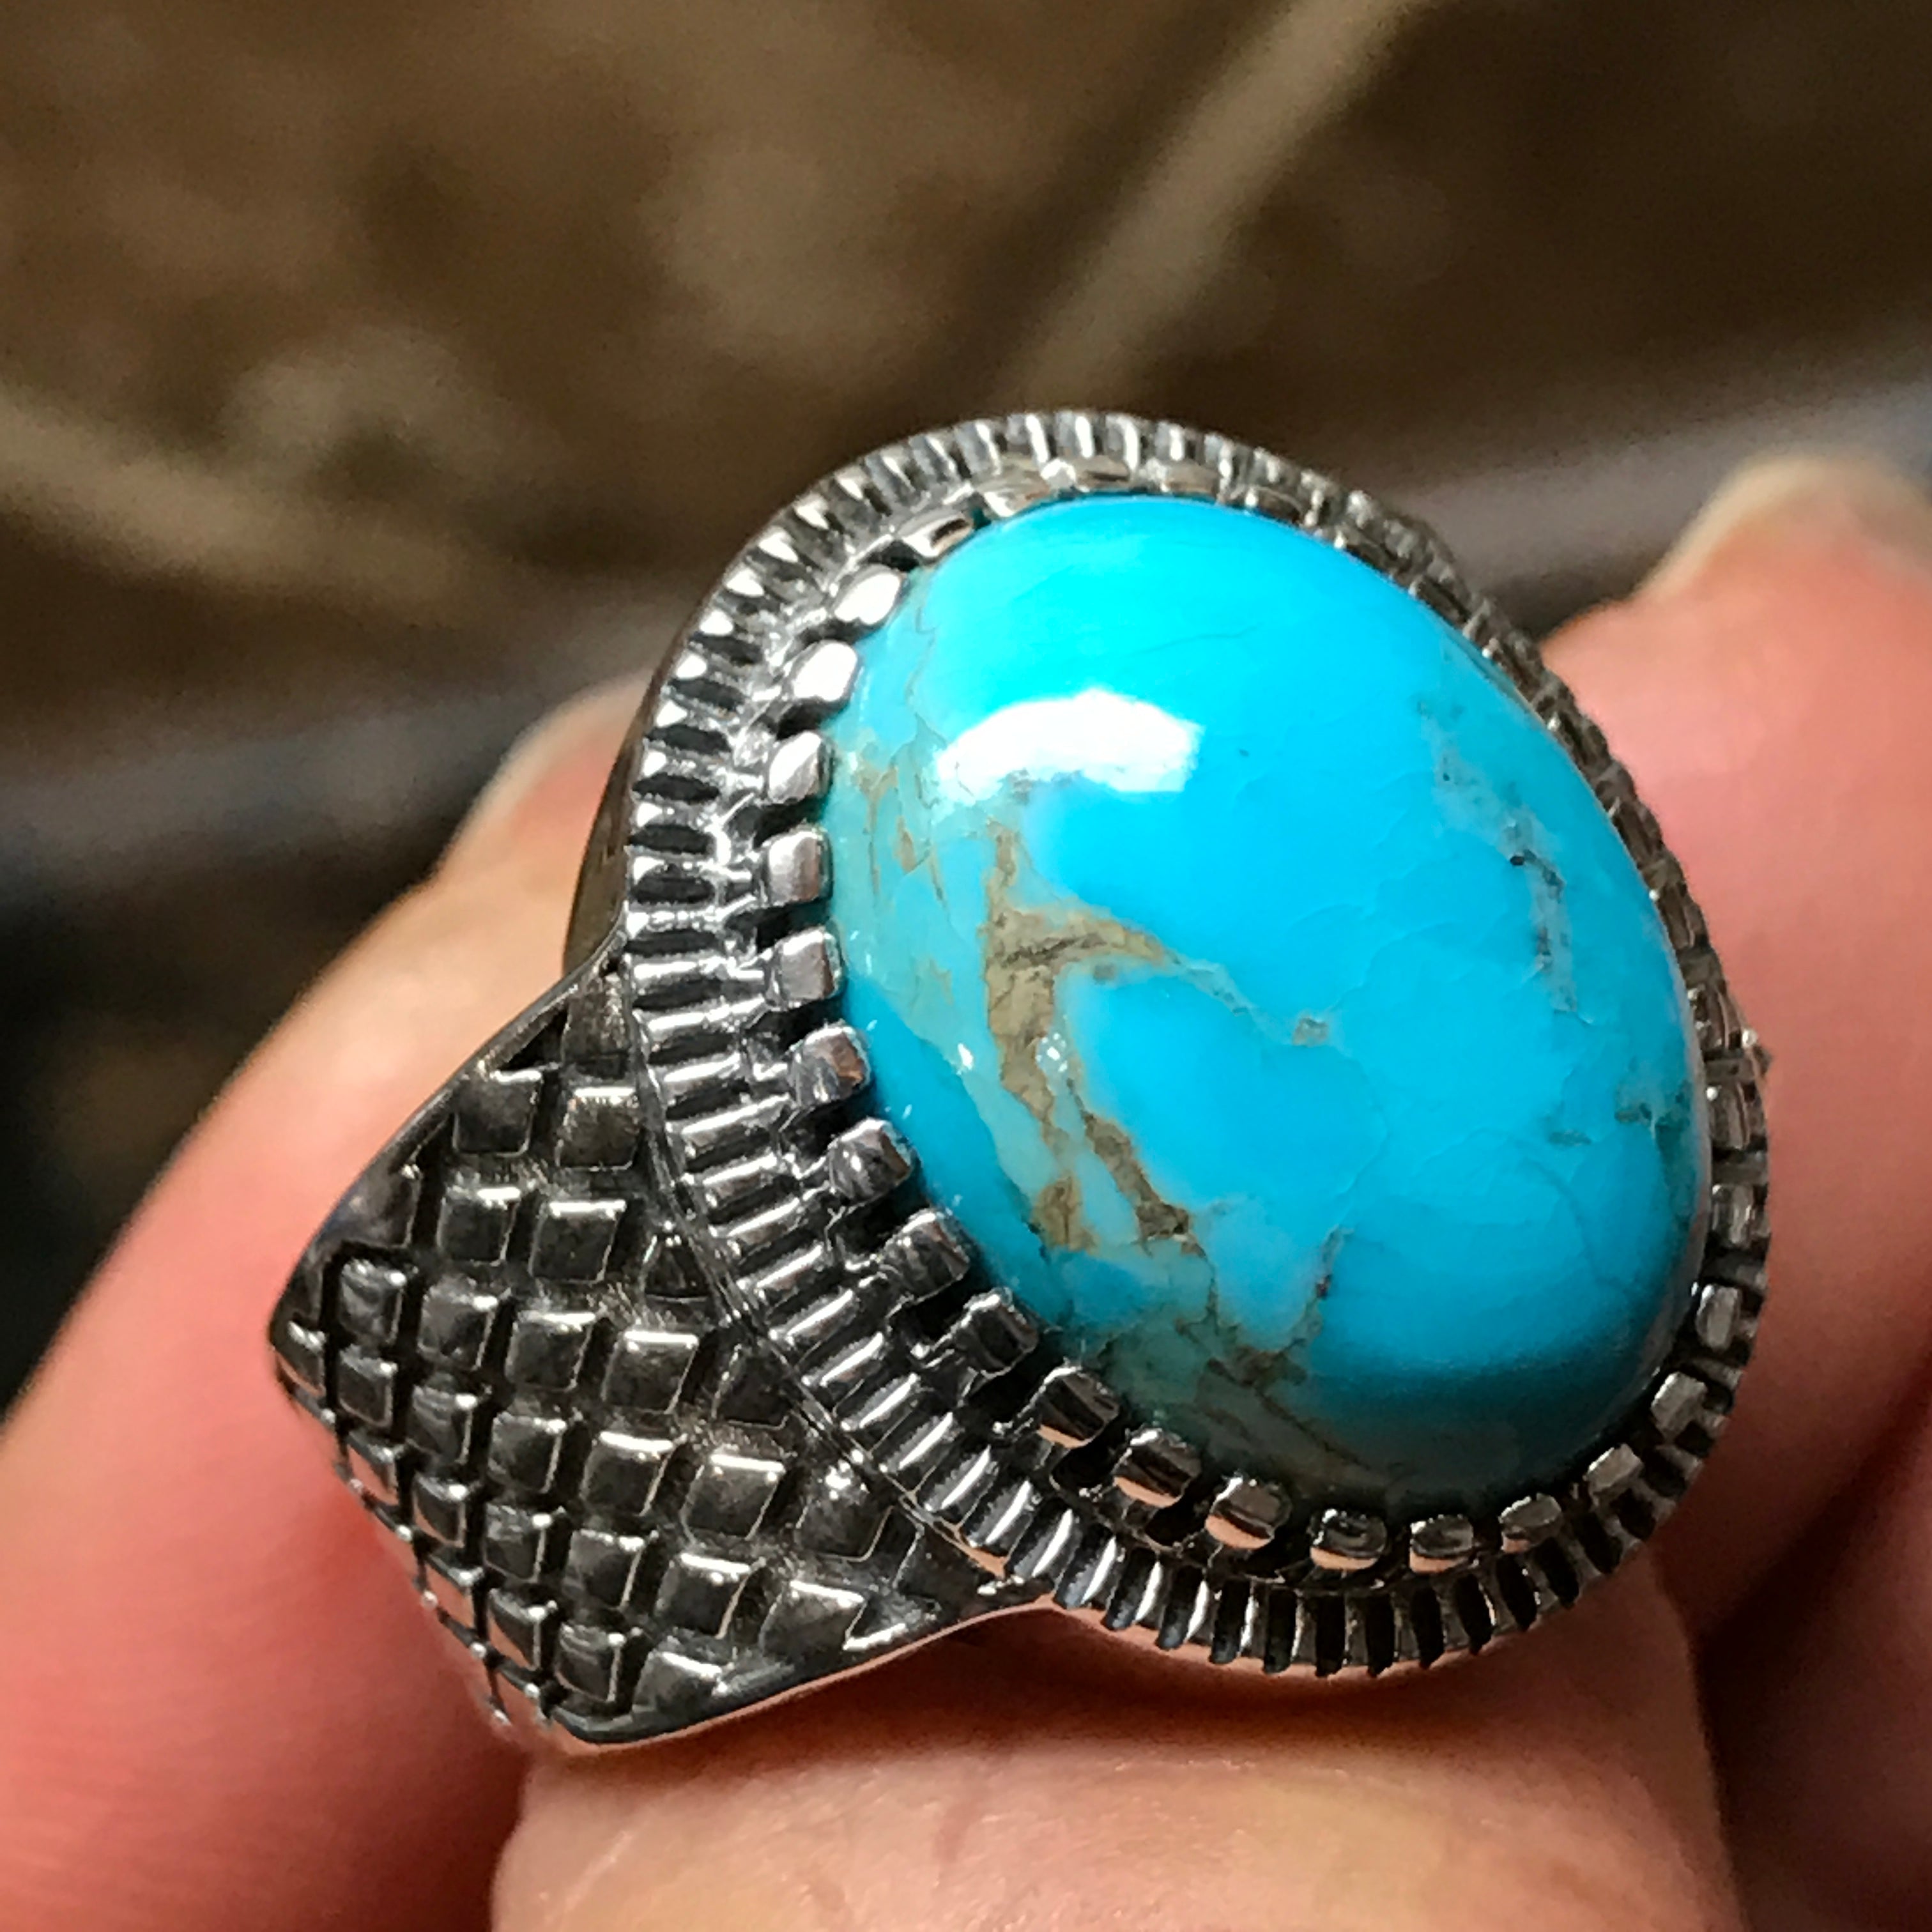 Natural Blue Mohave Turquoise 925 Solid Sterling Silver Men's Ring Size 7, 8, 9, 10, 11, 12 - Natural Rocks by Kala